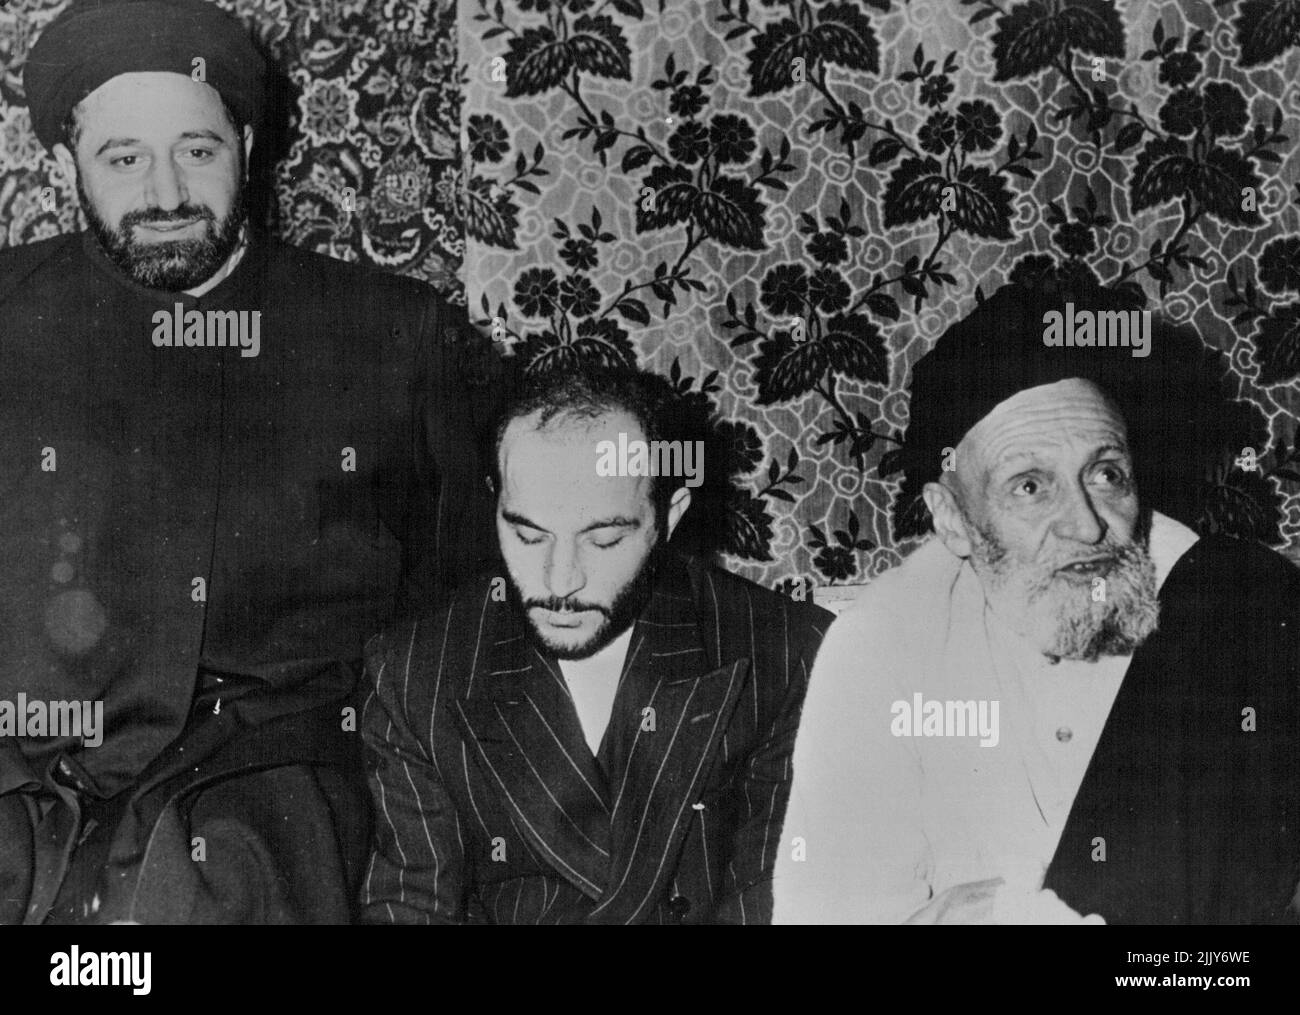 Kashani Receives Released Assassin - From left to right: Qanatabad; Khalil Tahmasbi; Kashani Khalil Tahmasbi, member of the fanatic group Fadain Islam, the man who assassinated General Razmara and started the whole oil crisis in Iran was freed from prison under a special law passed by the Majl's under the influence of Seyyed Abulkasin Kashani, speaker of the Majlis, and religious leader of the extreme Nationalists, who joyfully welcomed his disciple back. With them is Qanatabadi another prominent member who is likely to become Kashani's successor. January 20, 1953. (Photo by Camera Press). Stock Photo